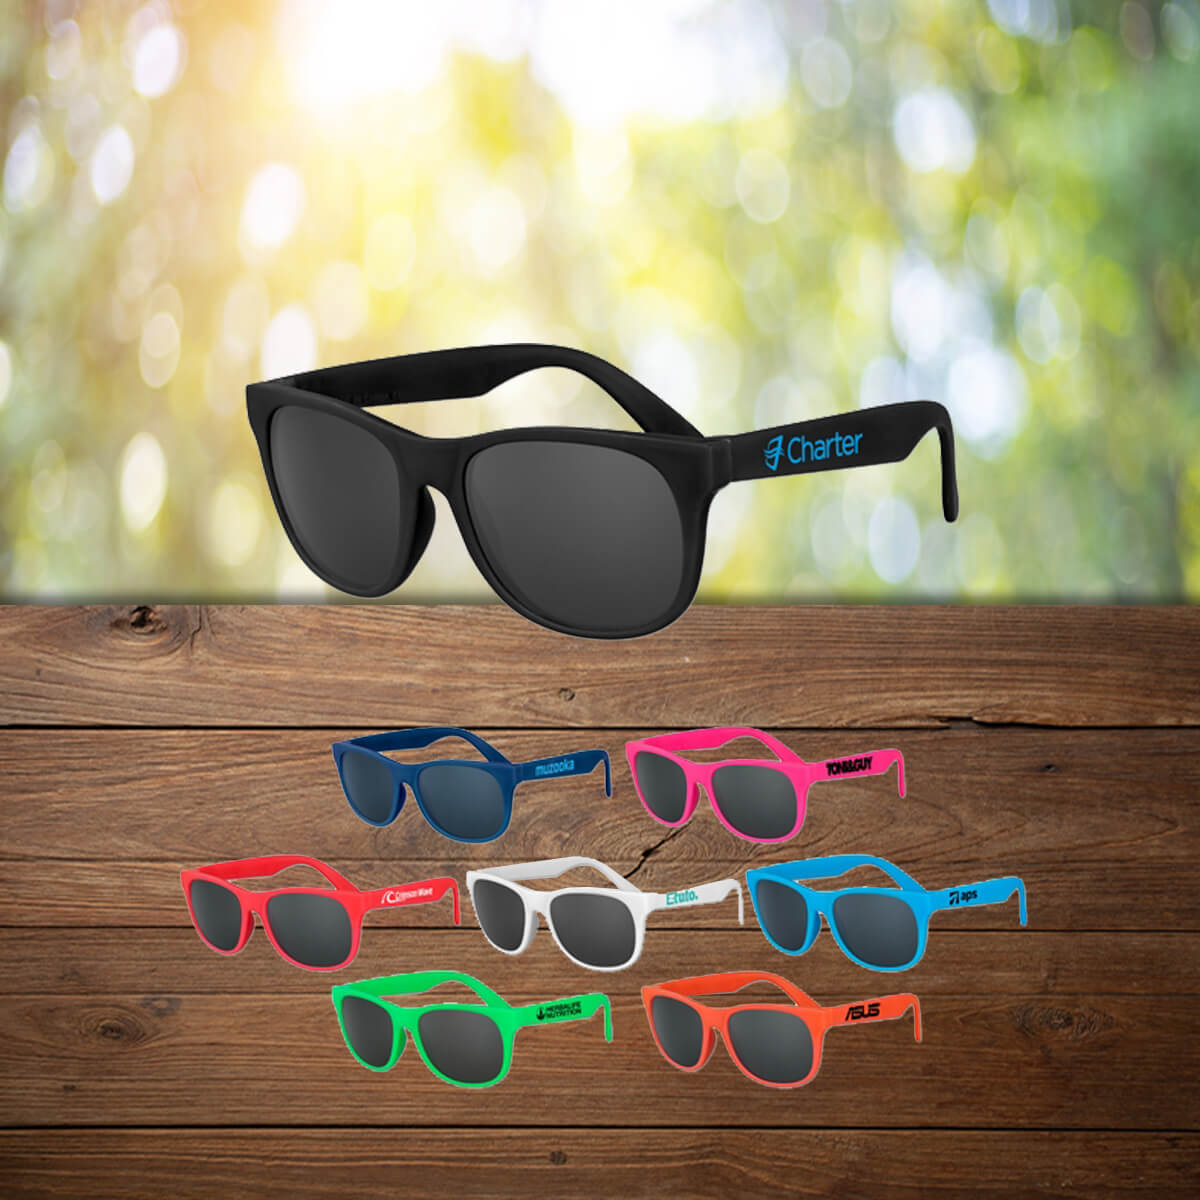 Color variety for branded sunglasses promotional wellness & safety by curative printing